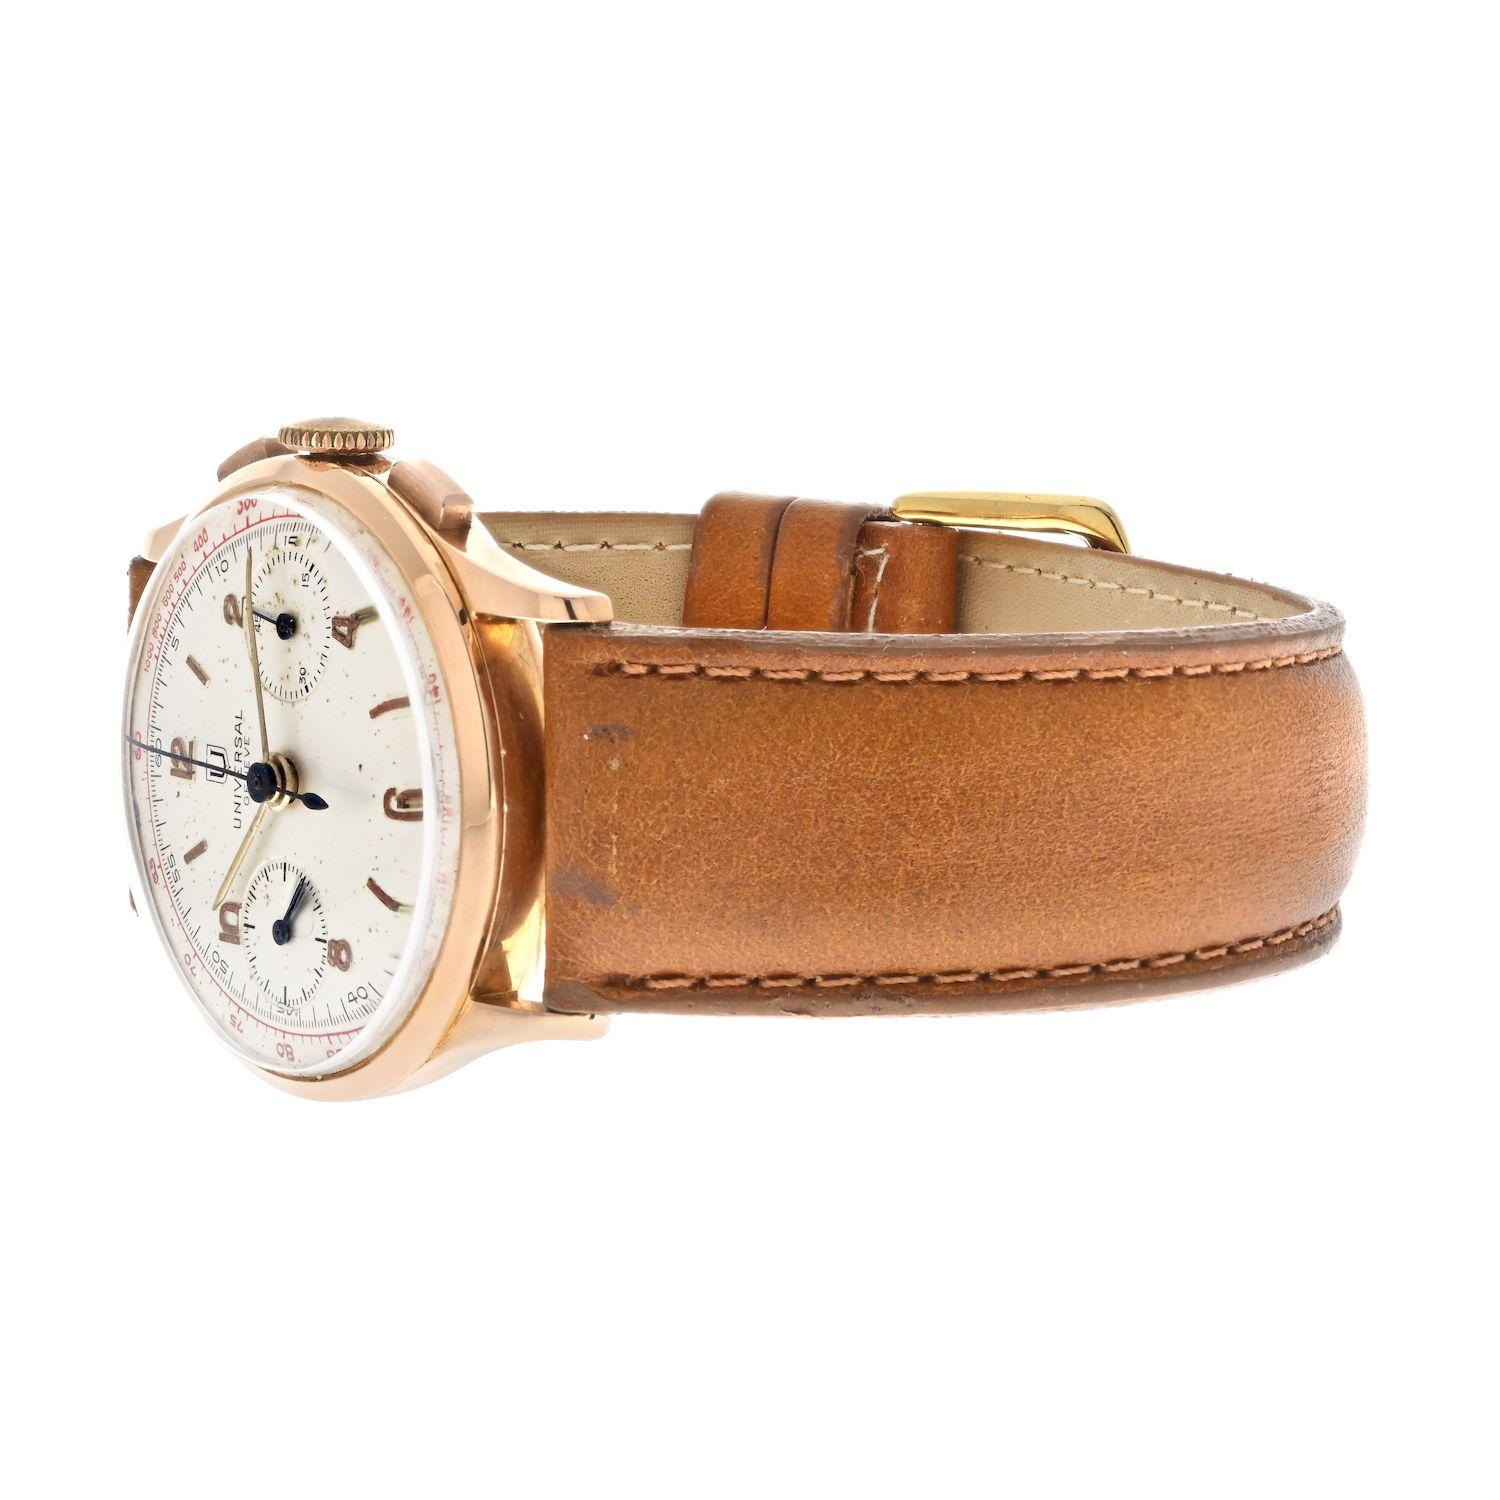 Universal Geneve Chronograph 18K Rose Gold 1940's Vintage Mens Watch.
34mm wide.
Manual Wind.